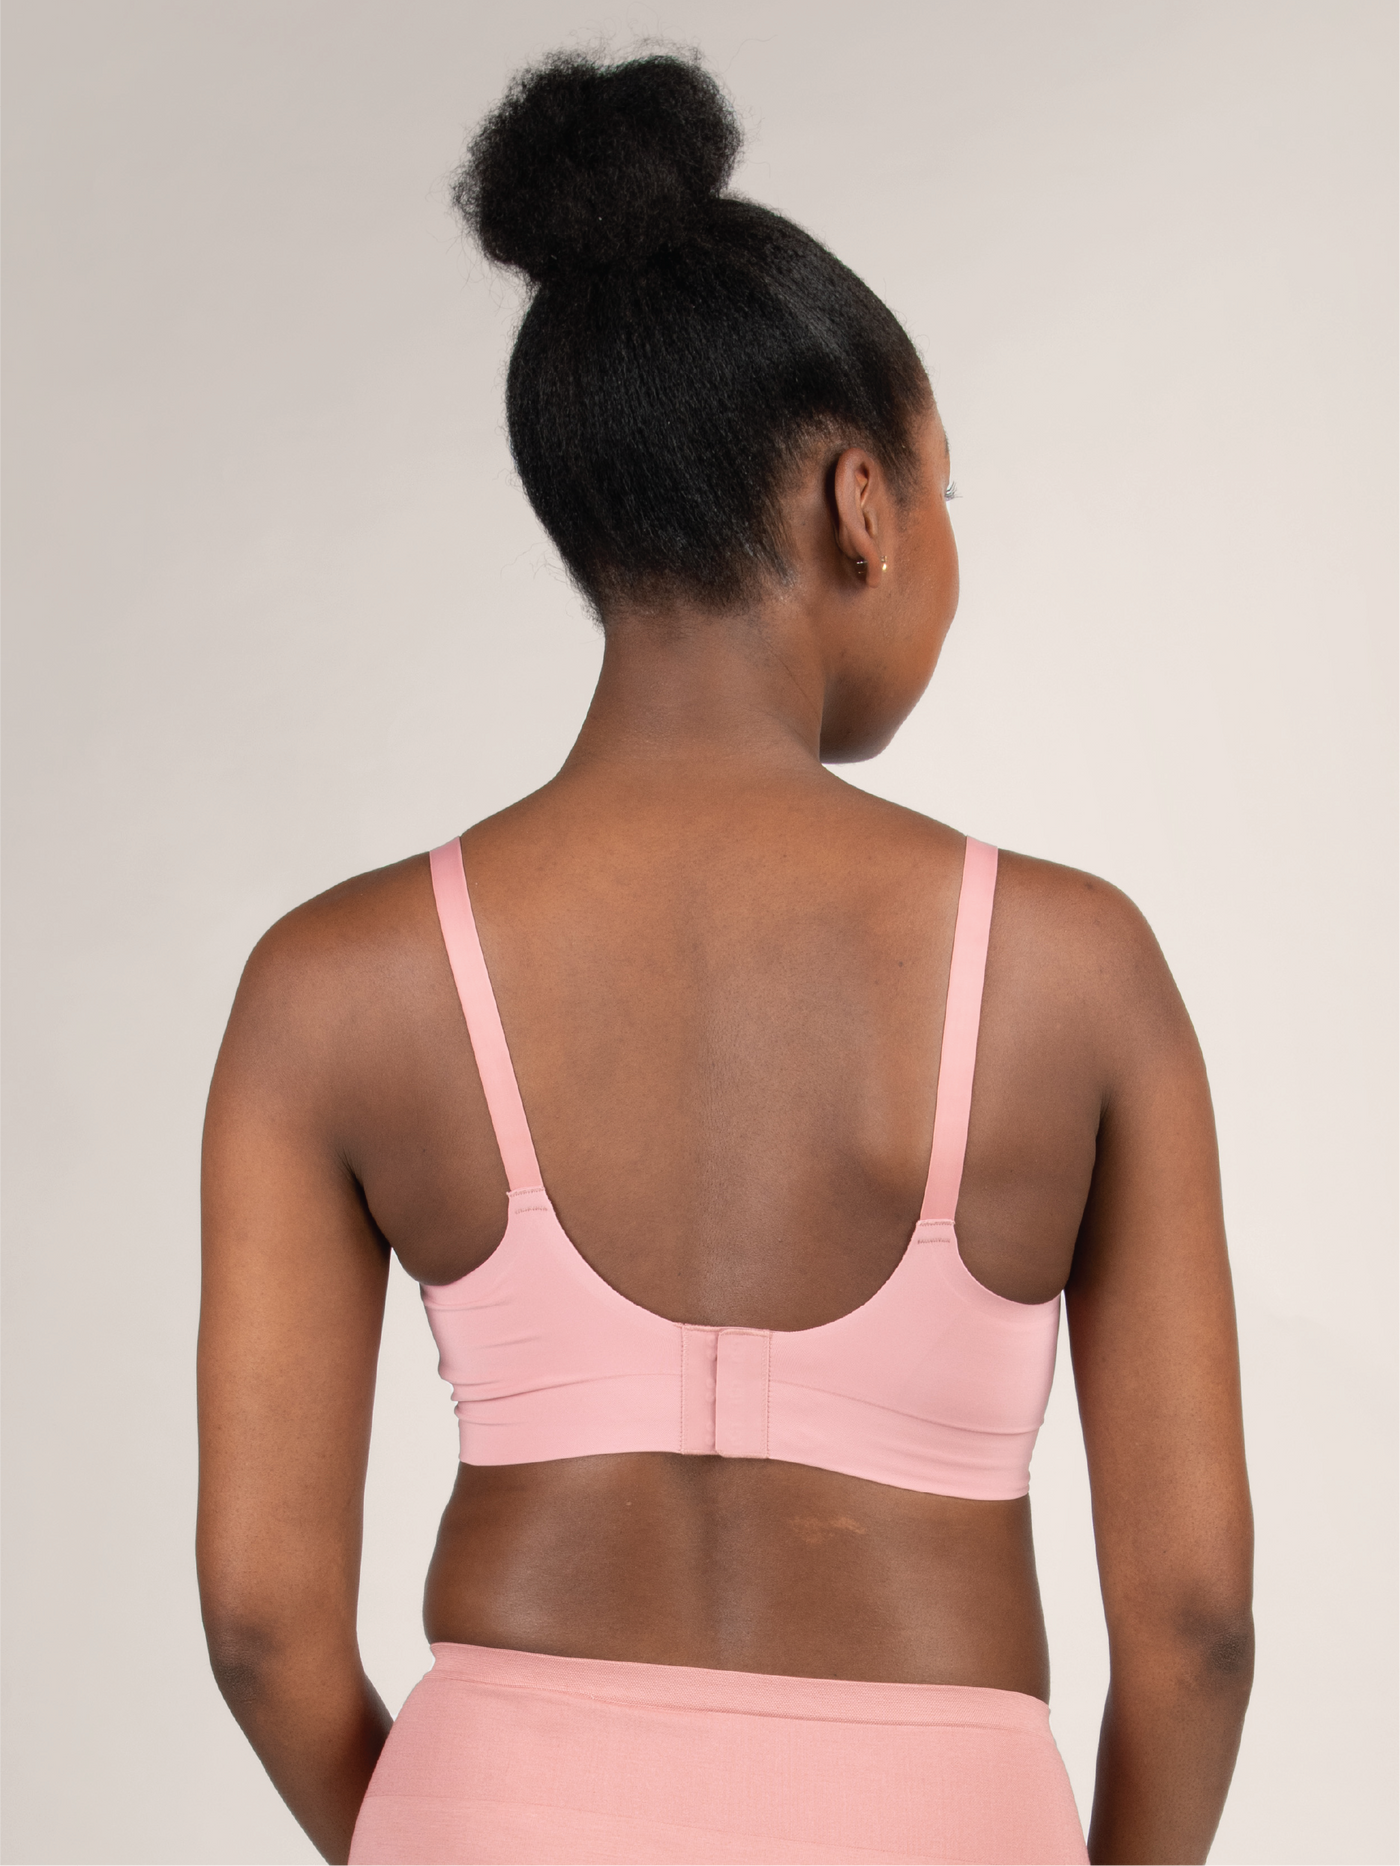 Maternity Bras Recommendation  Gallery posted by Harmonie Mohala